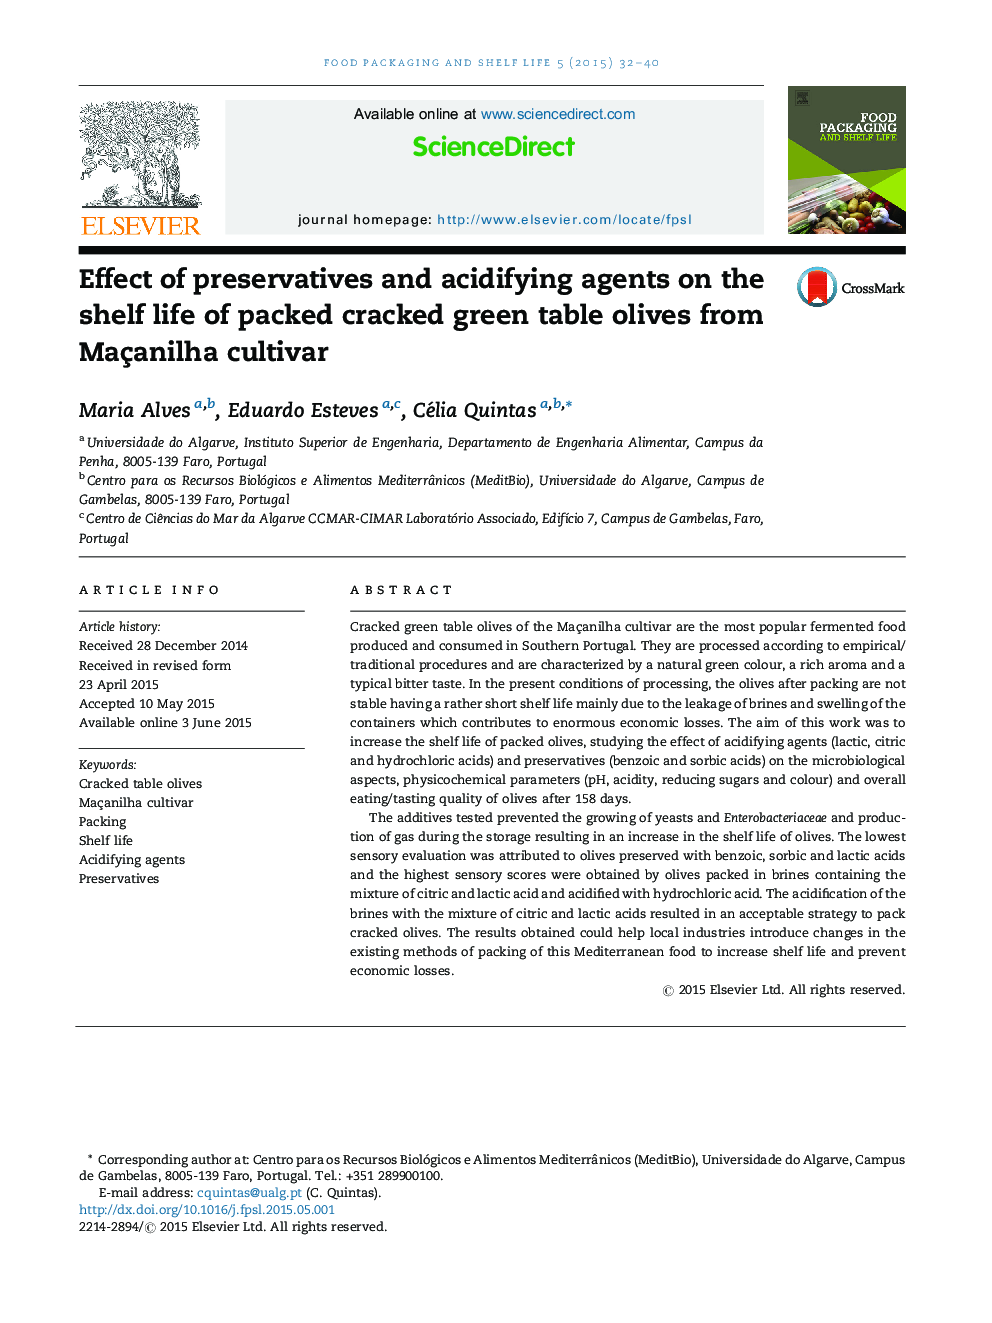 Effect of preservatives and acidifying agents on the shelf life of packed cracked green table olives from Maçanilha cultivar